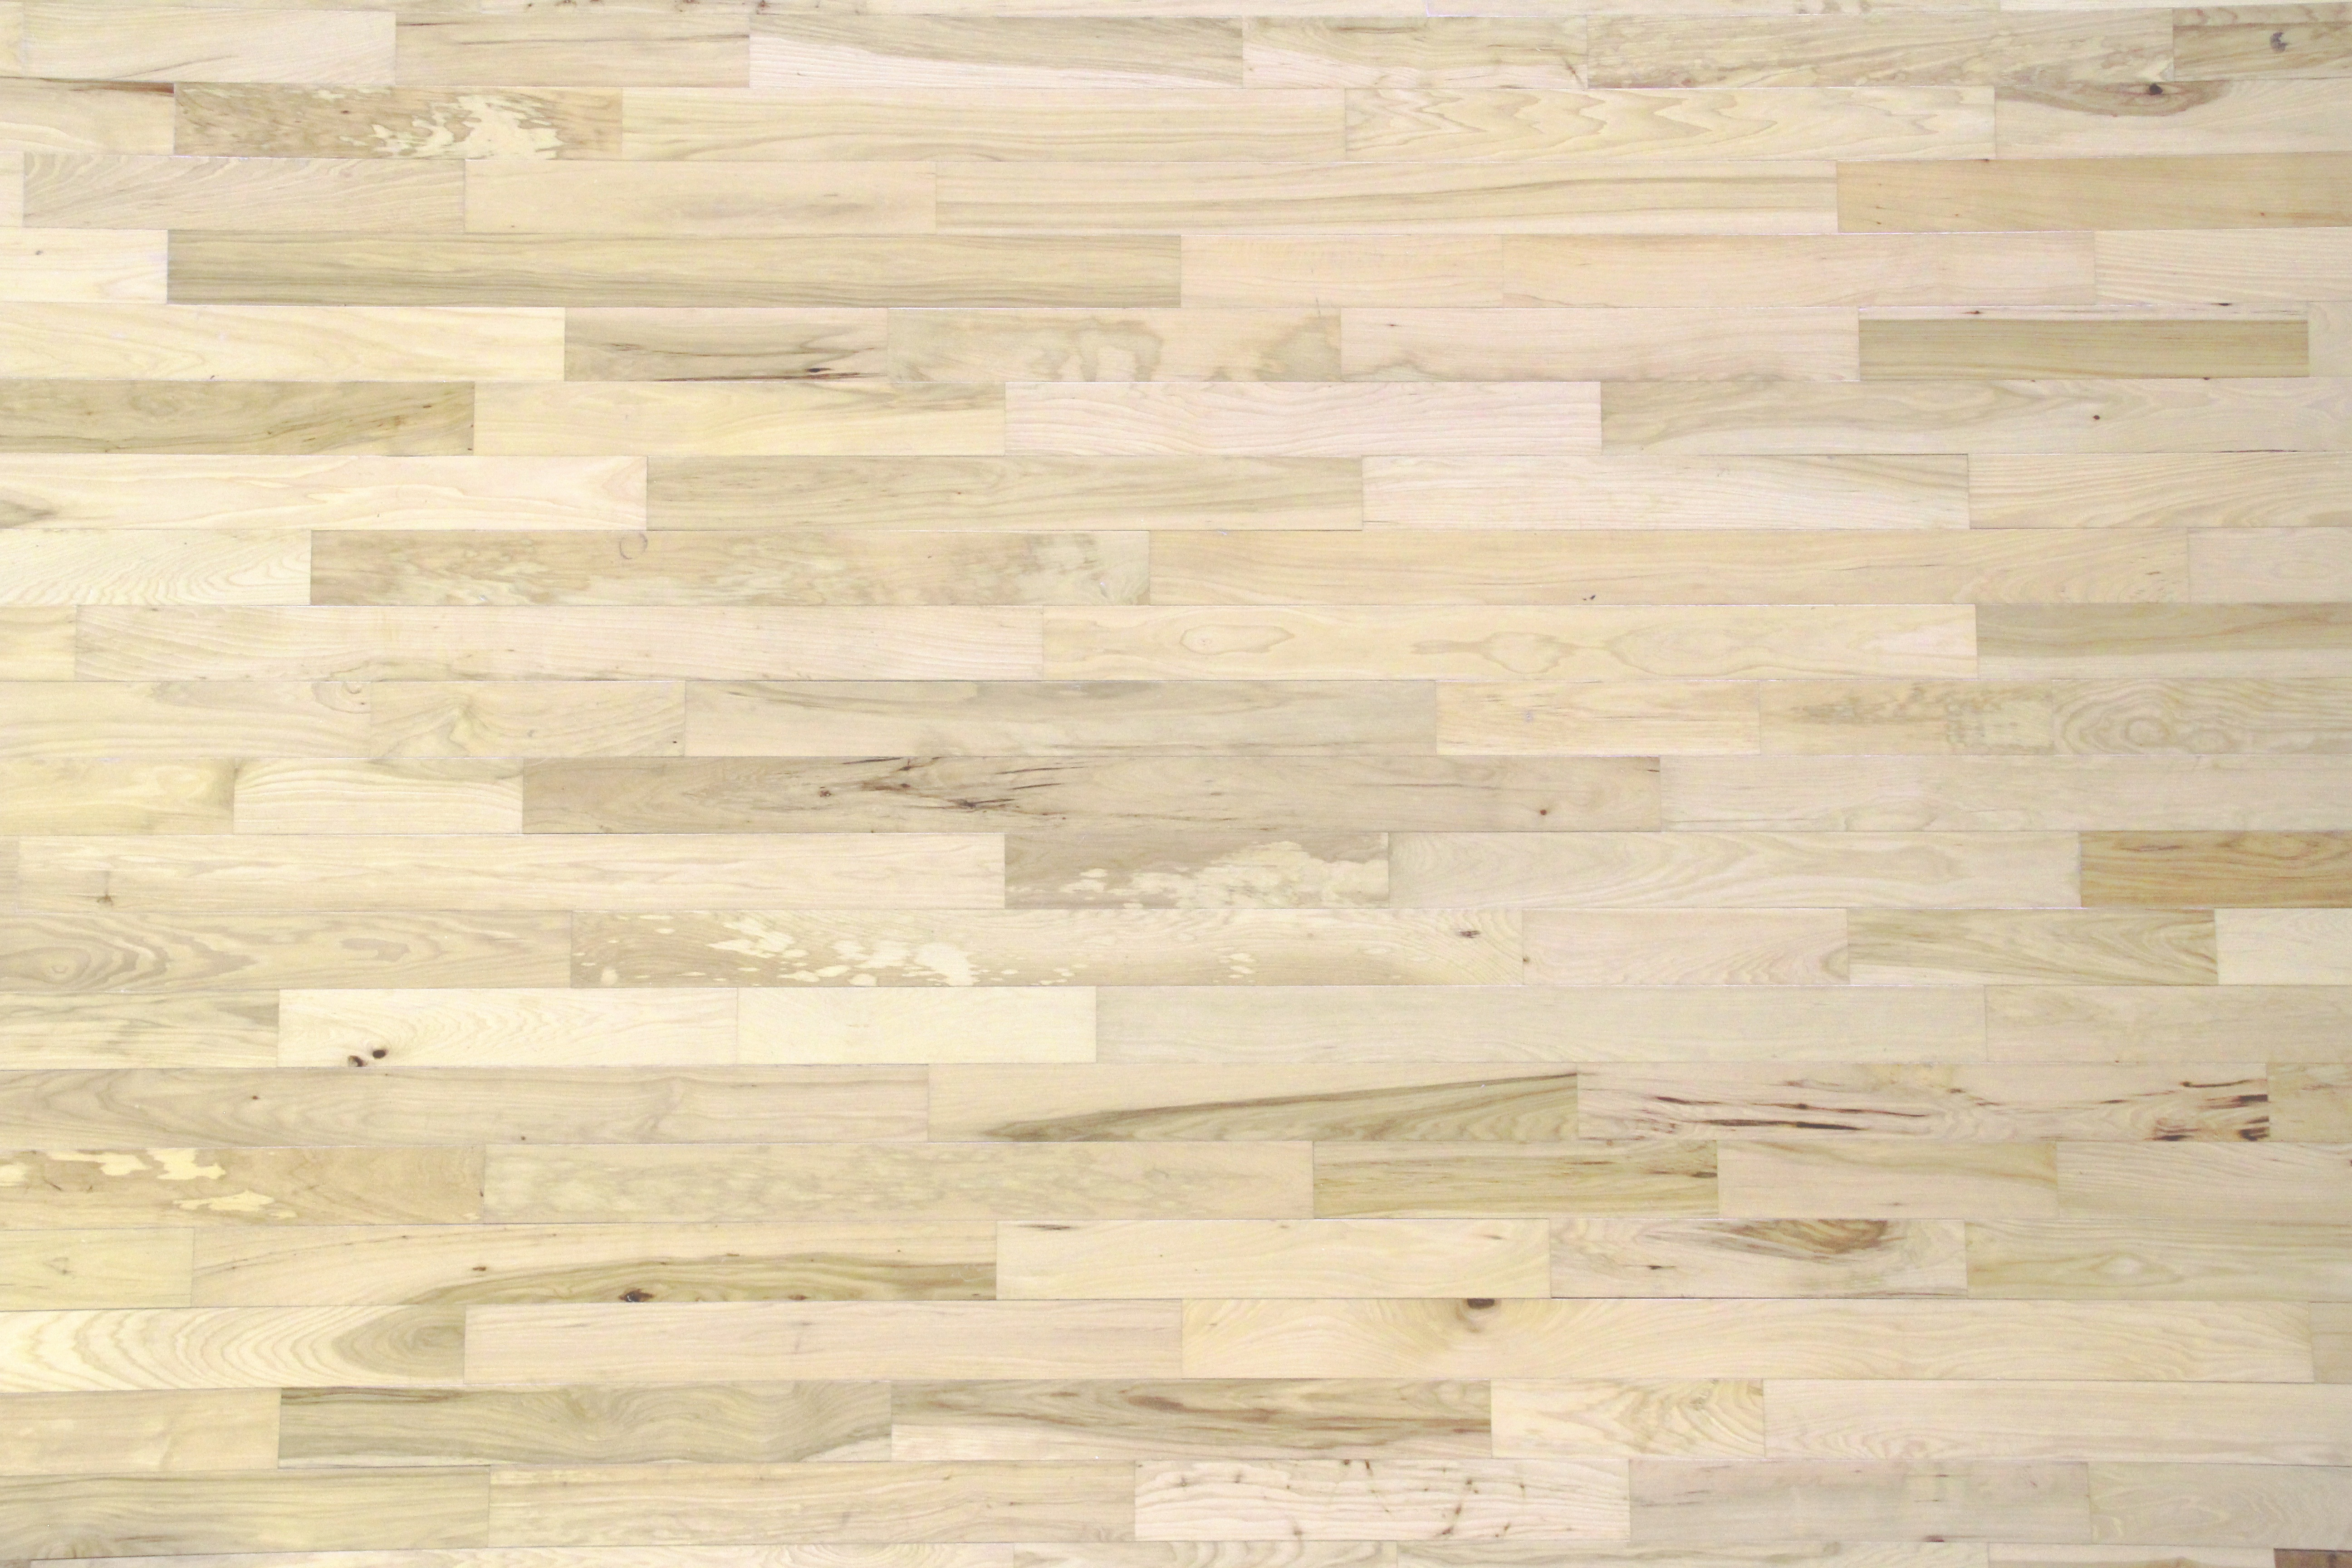 10 Ideal Hardwood Floor Colors Images 2024 free download hardwood floor colors images of free images texture wall pine construction tile lumber throughout wood texture floor wall pine construction tile lumber surface wood floor basketball court ha